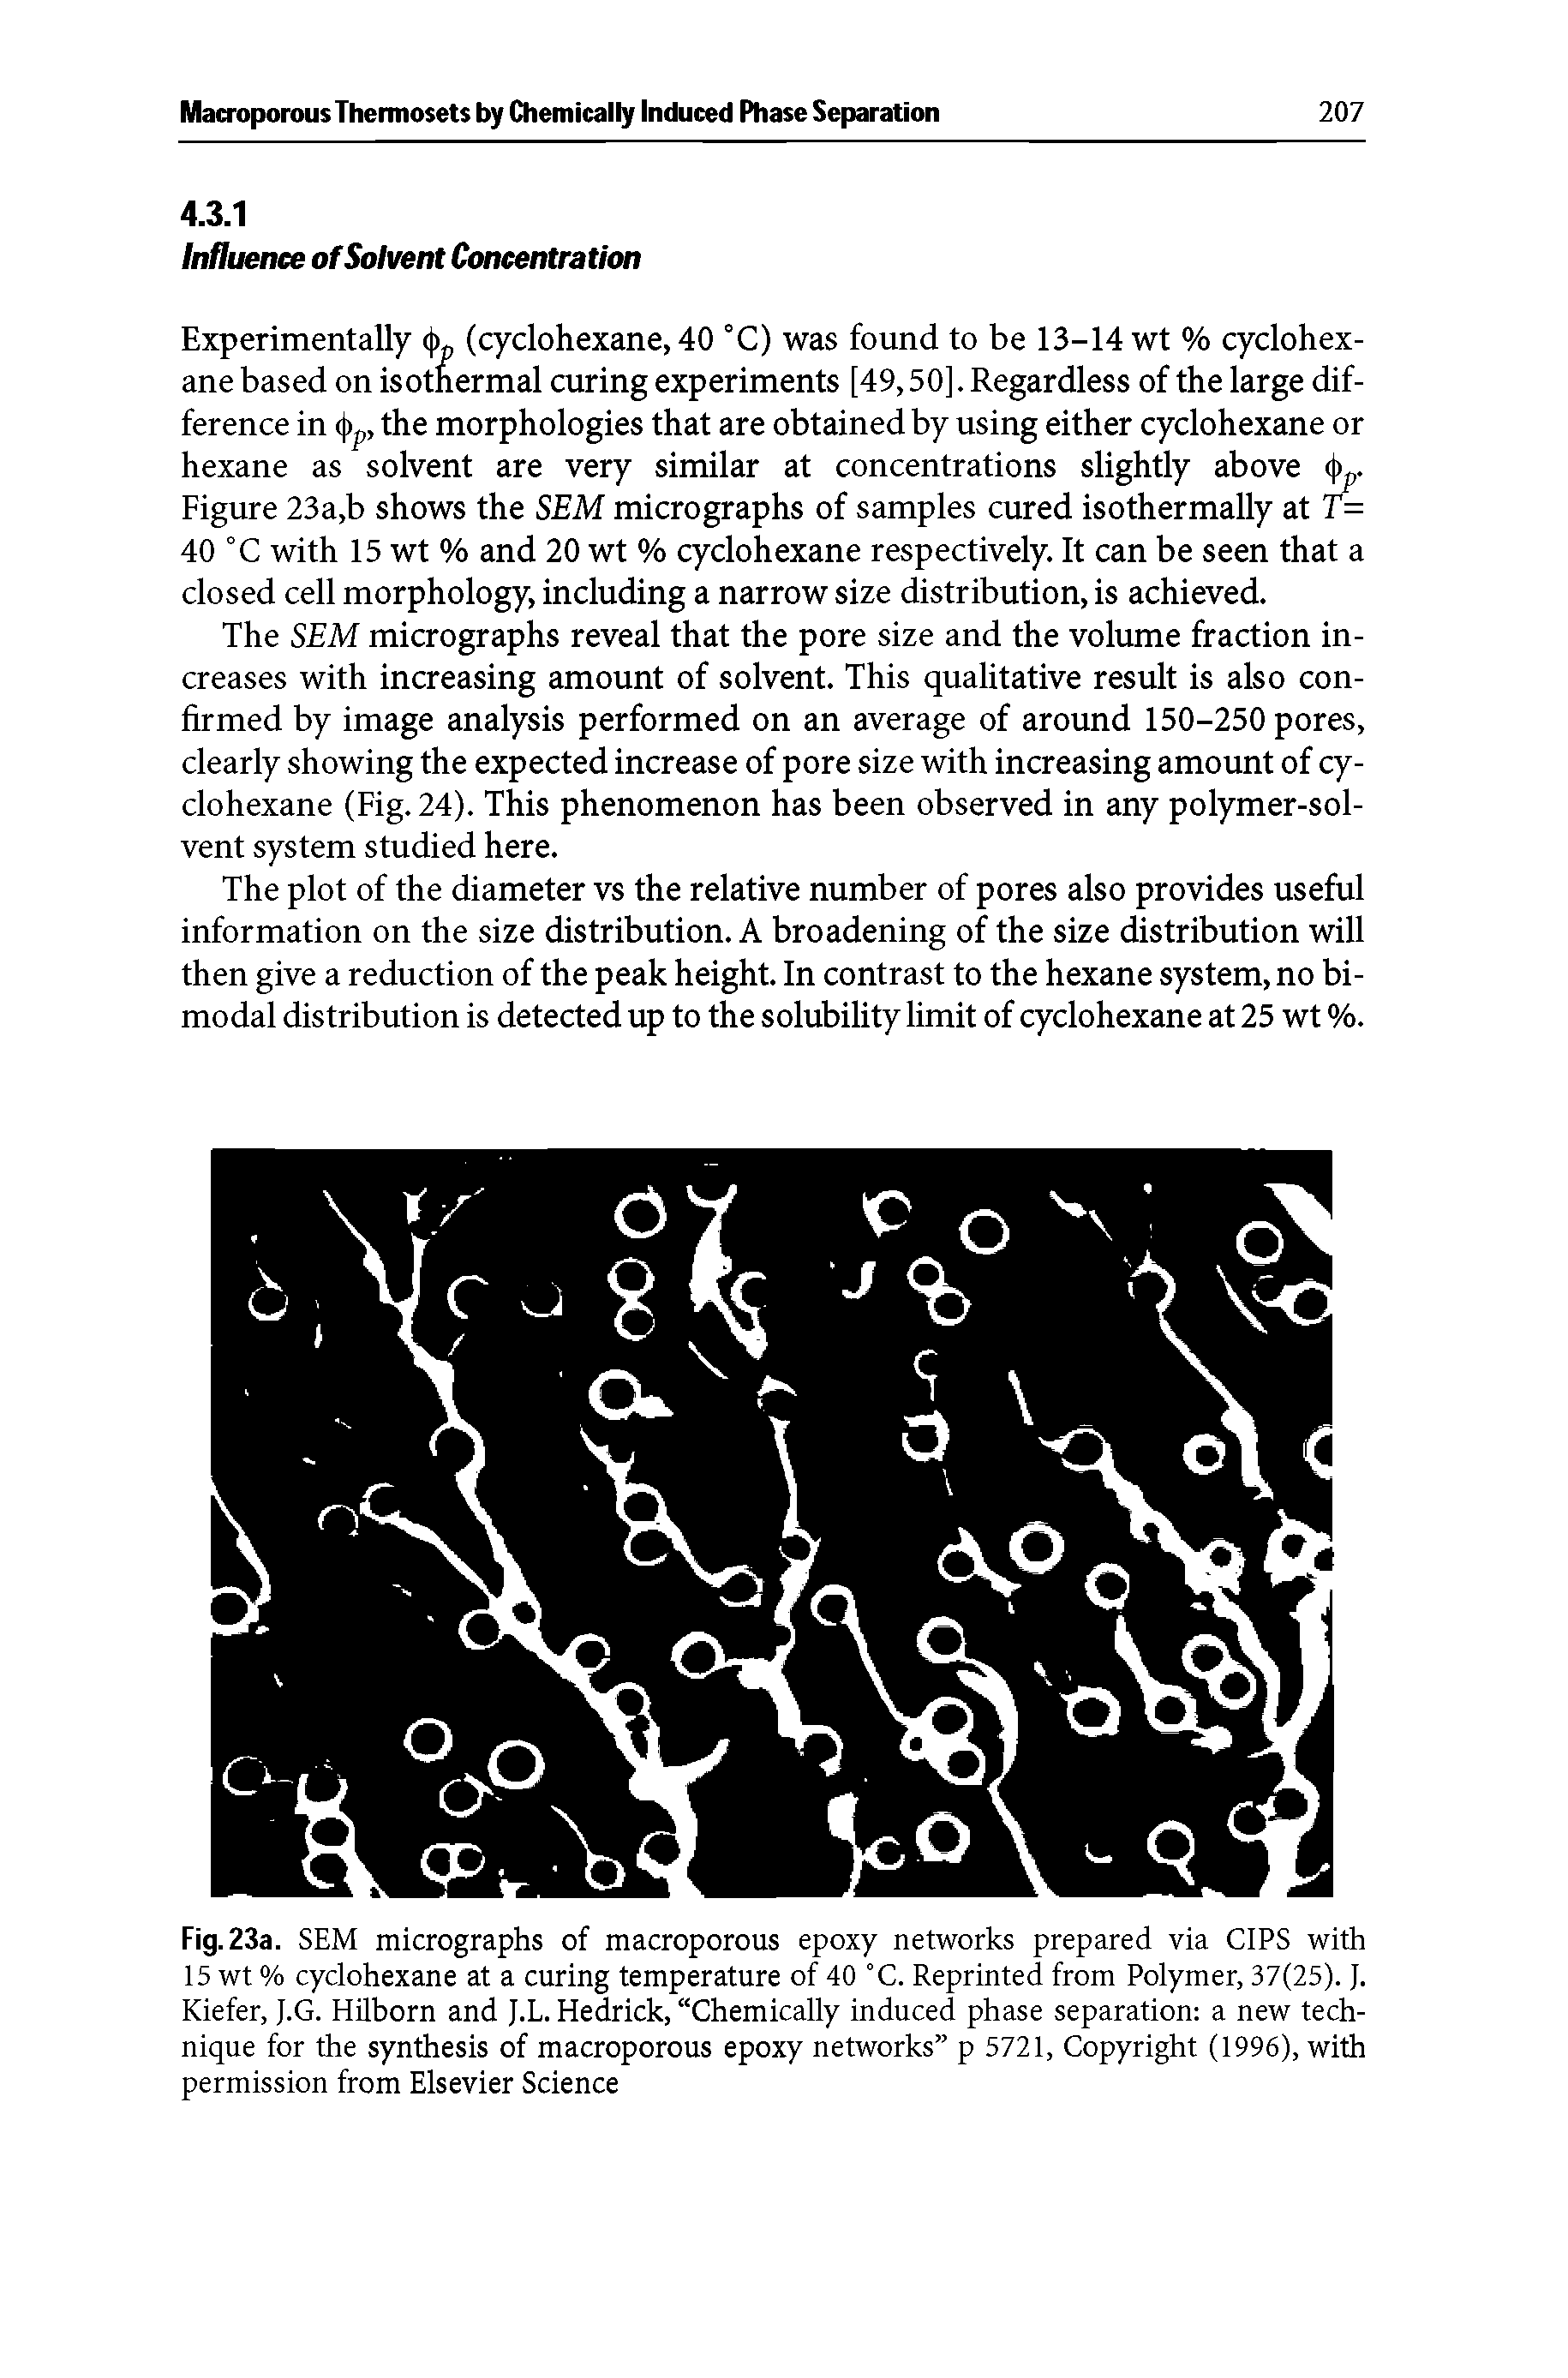 Fig. 23a. SEM micrographs of macroporous epoxy networks prepared via CIPS with 15 wt % cyclohexane at a curing temperature of 40 °C. Reprinted from Polymer, 37(25). J. Kiefer, J.G. HUborn and J.L. Hedrick, Chemically induced phase separation a new technique for the synthesis of macroporous epoxy networks p 5721, Copyright (1996), with permission from Elsevier Science...